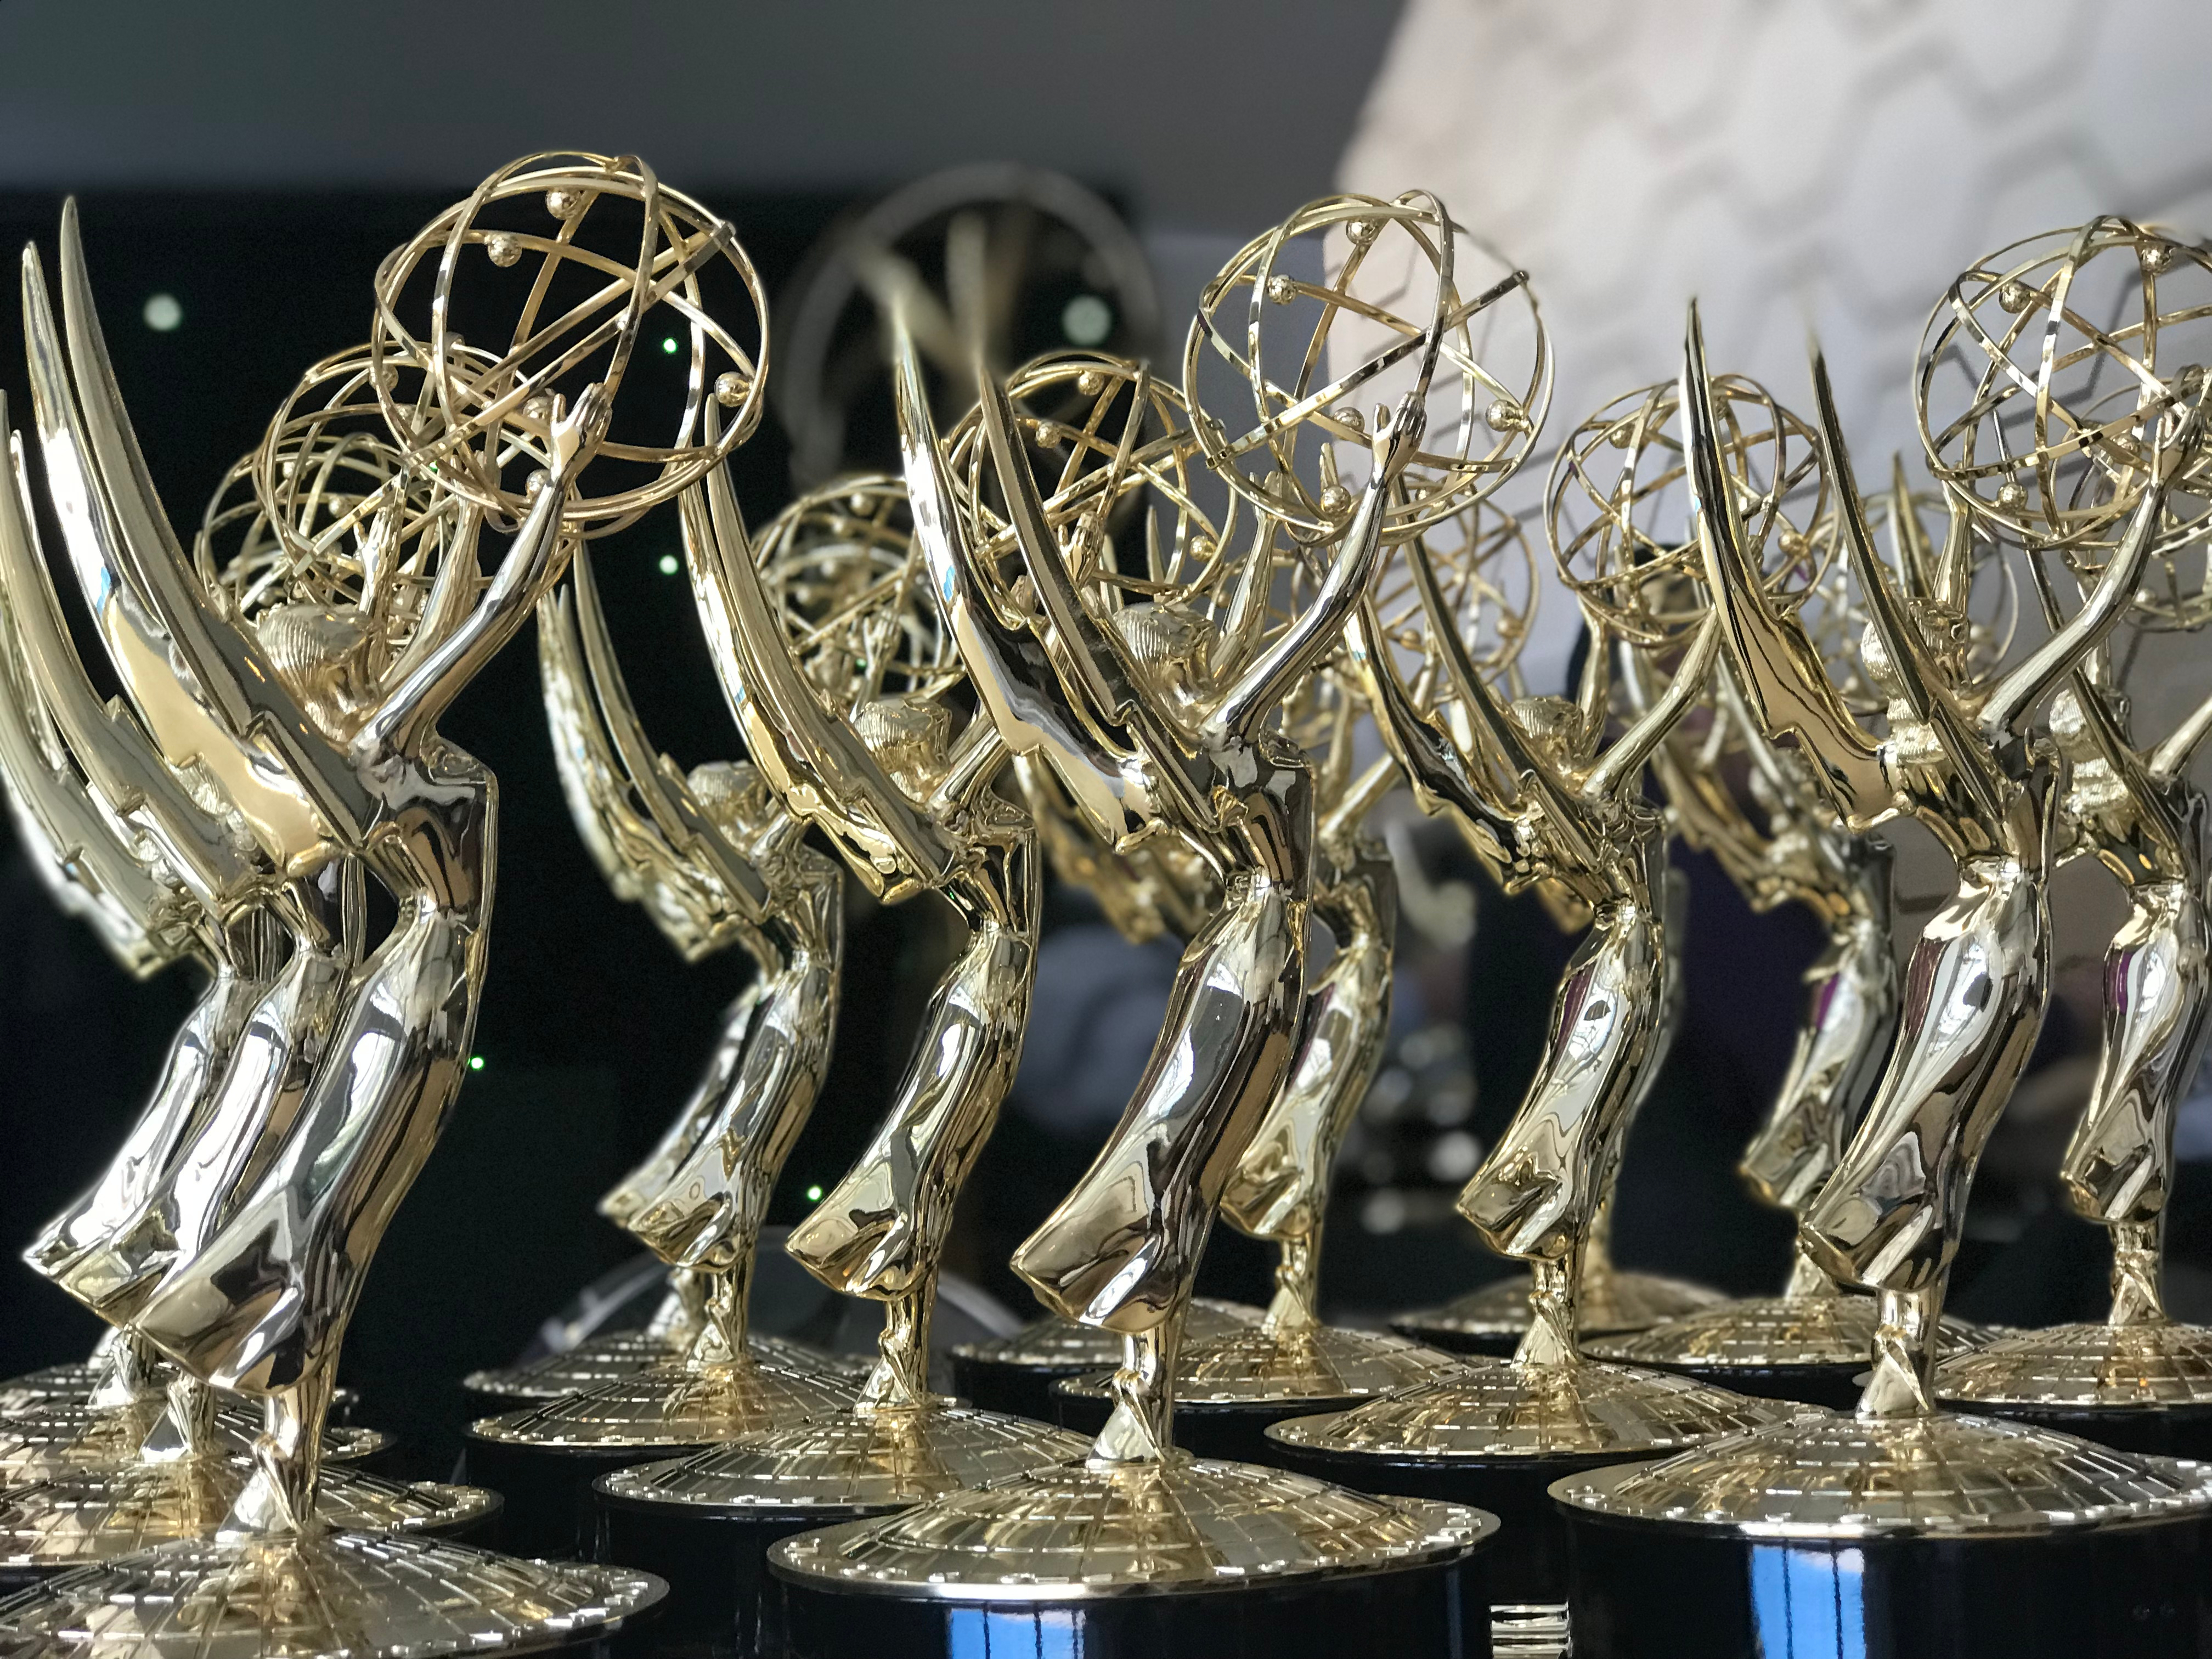 Belden received an Emmy Award for its commitment to ongoing innovation and significant impact on the industry.